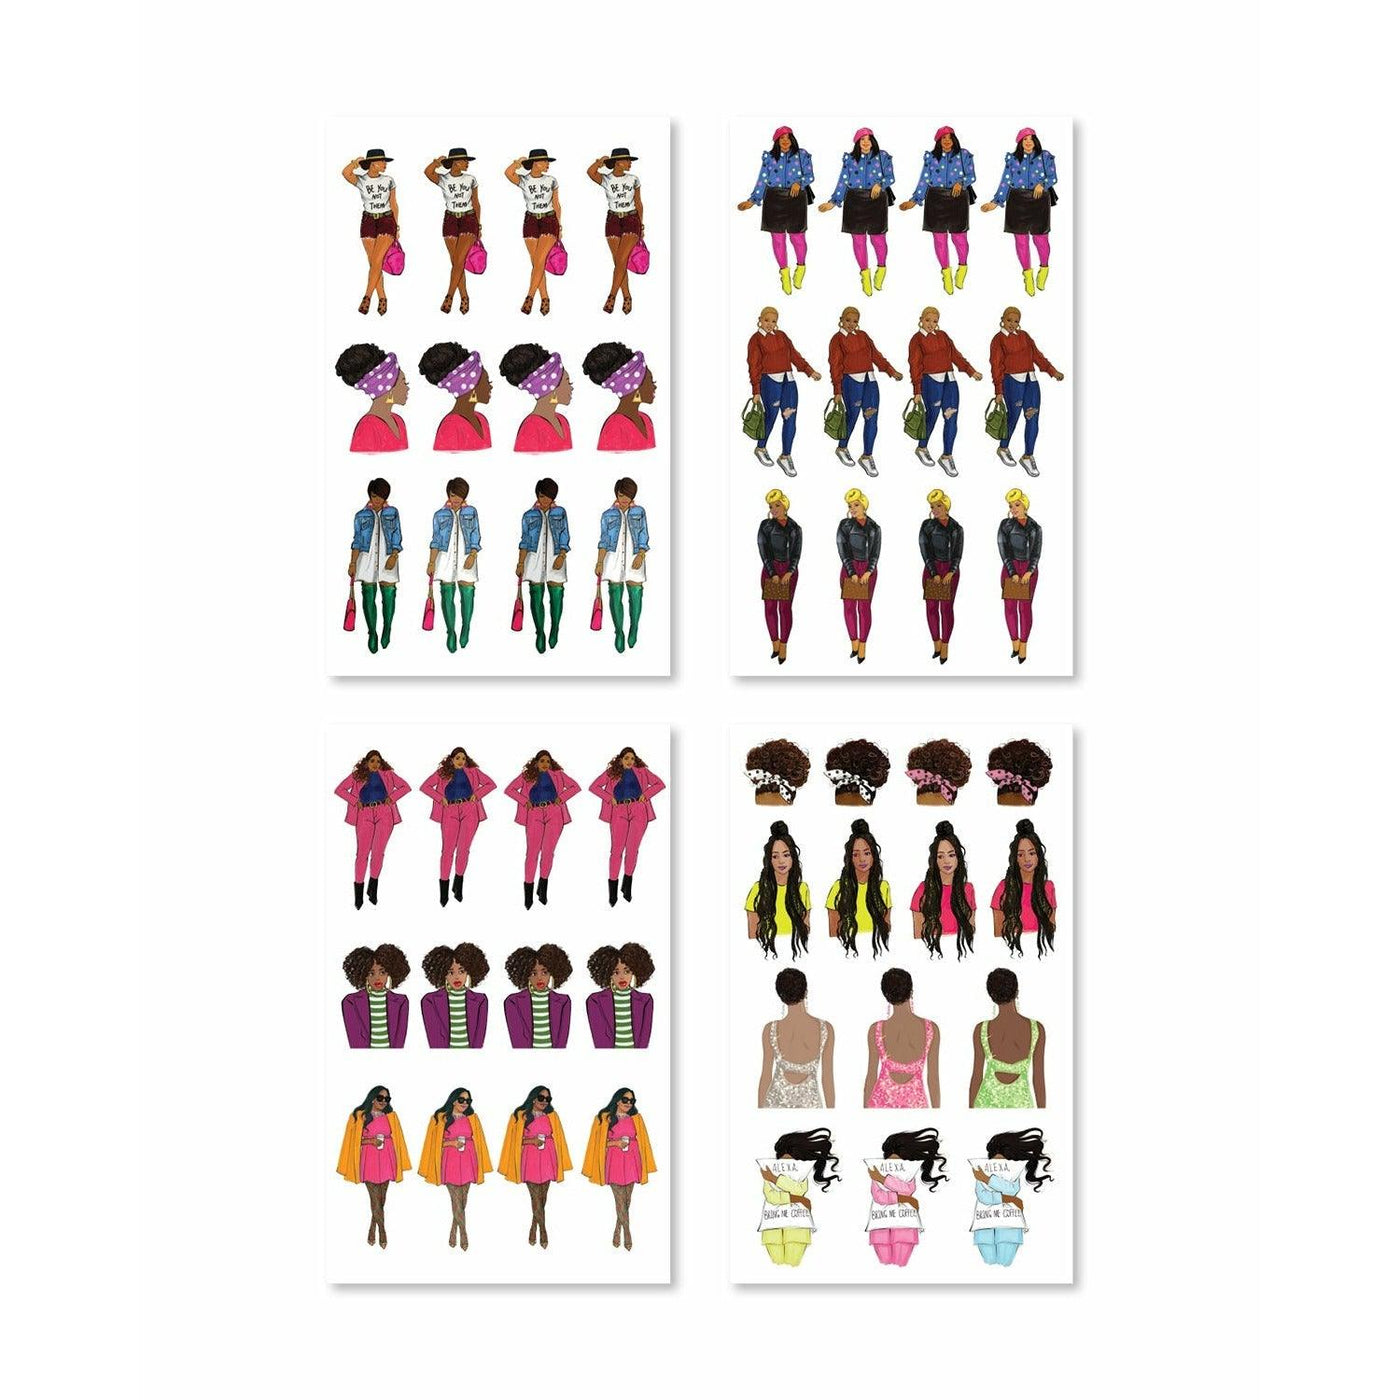 Black Girl Magic Digital Planner Stickers [DOWNLOAD] - Shop Rongrong